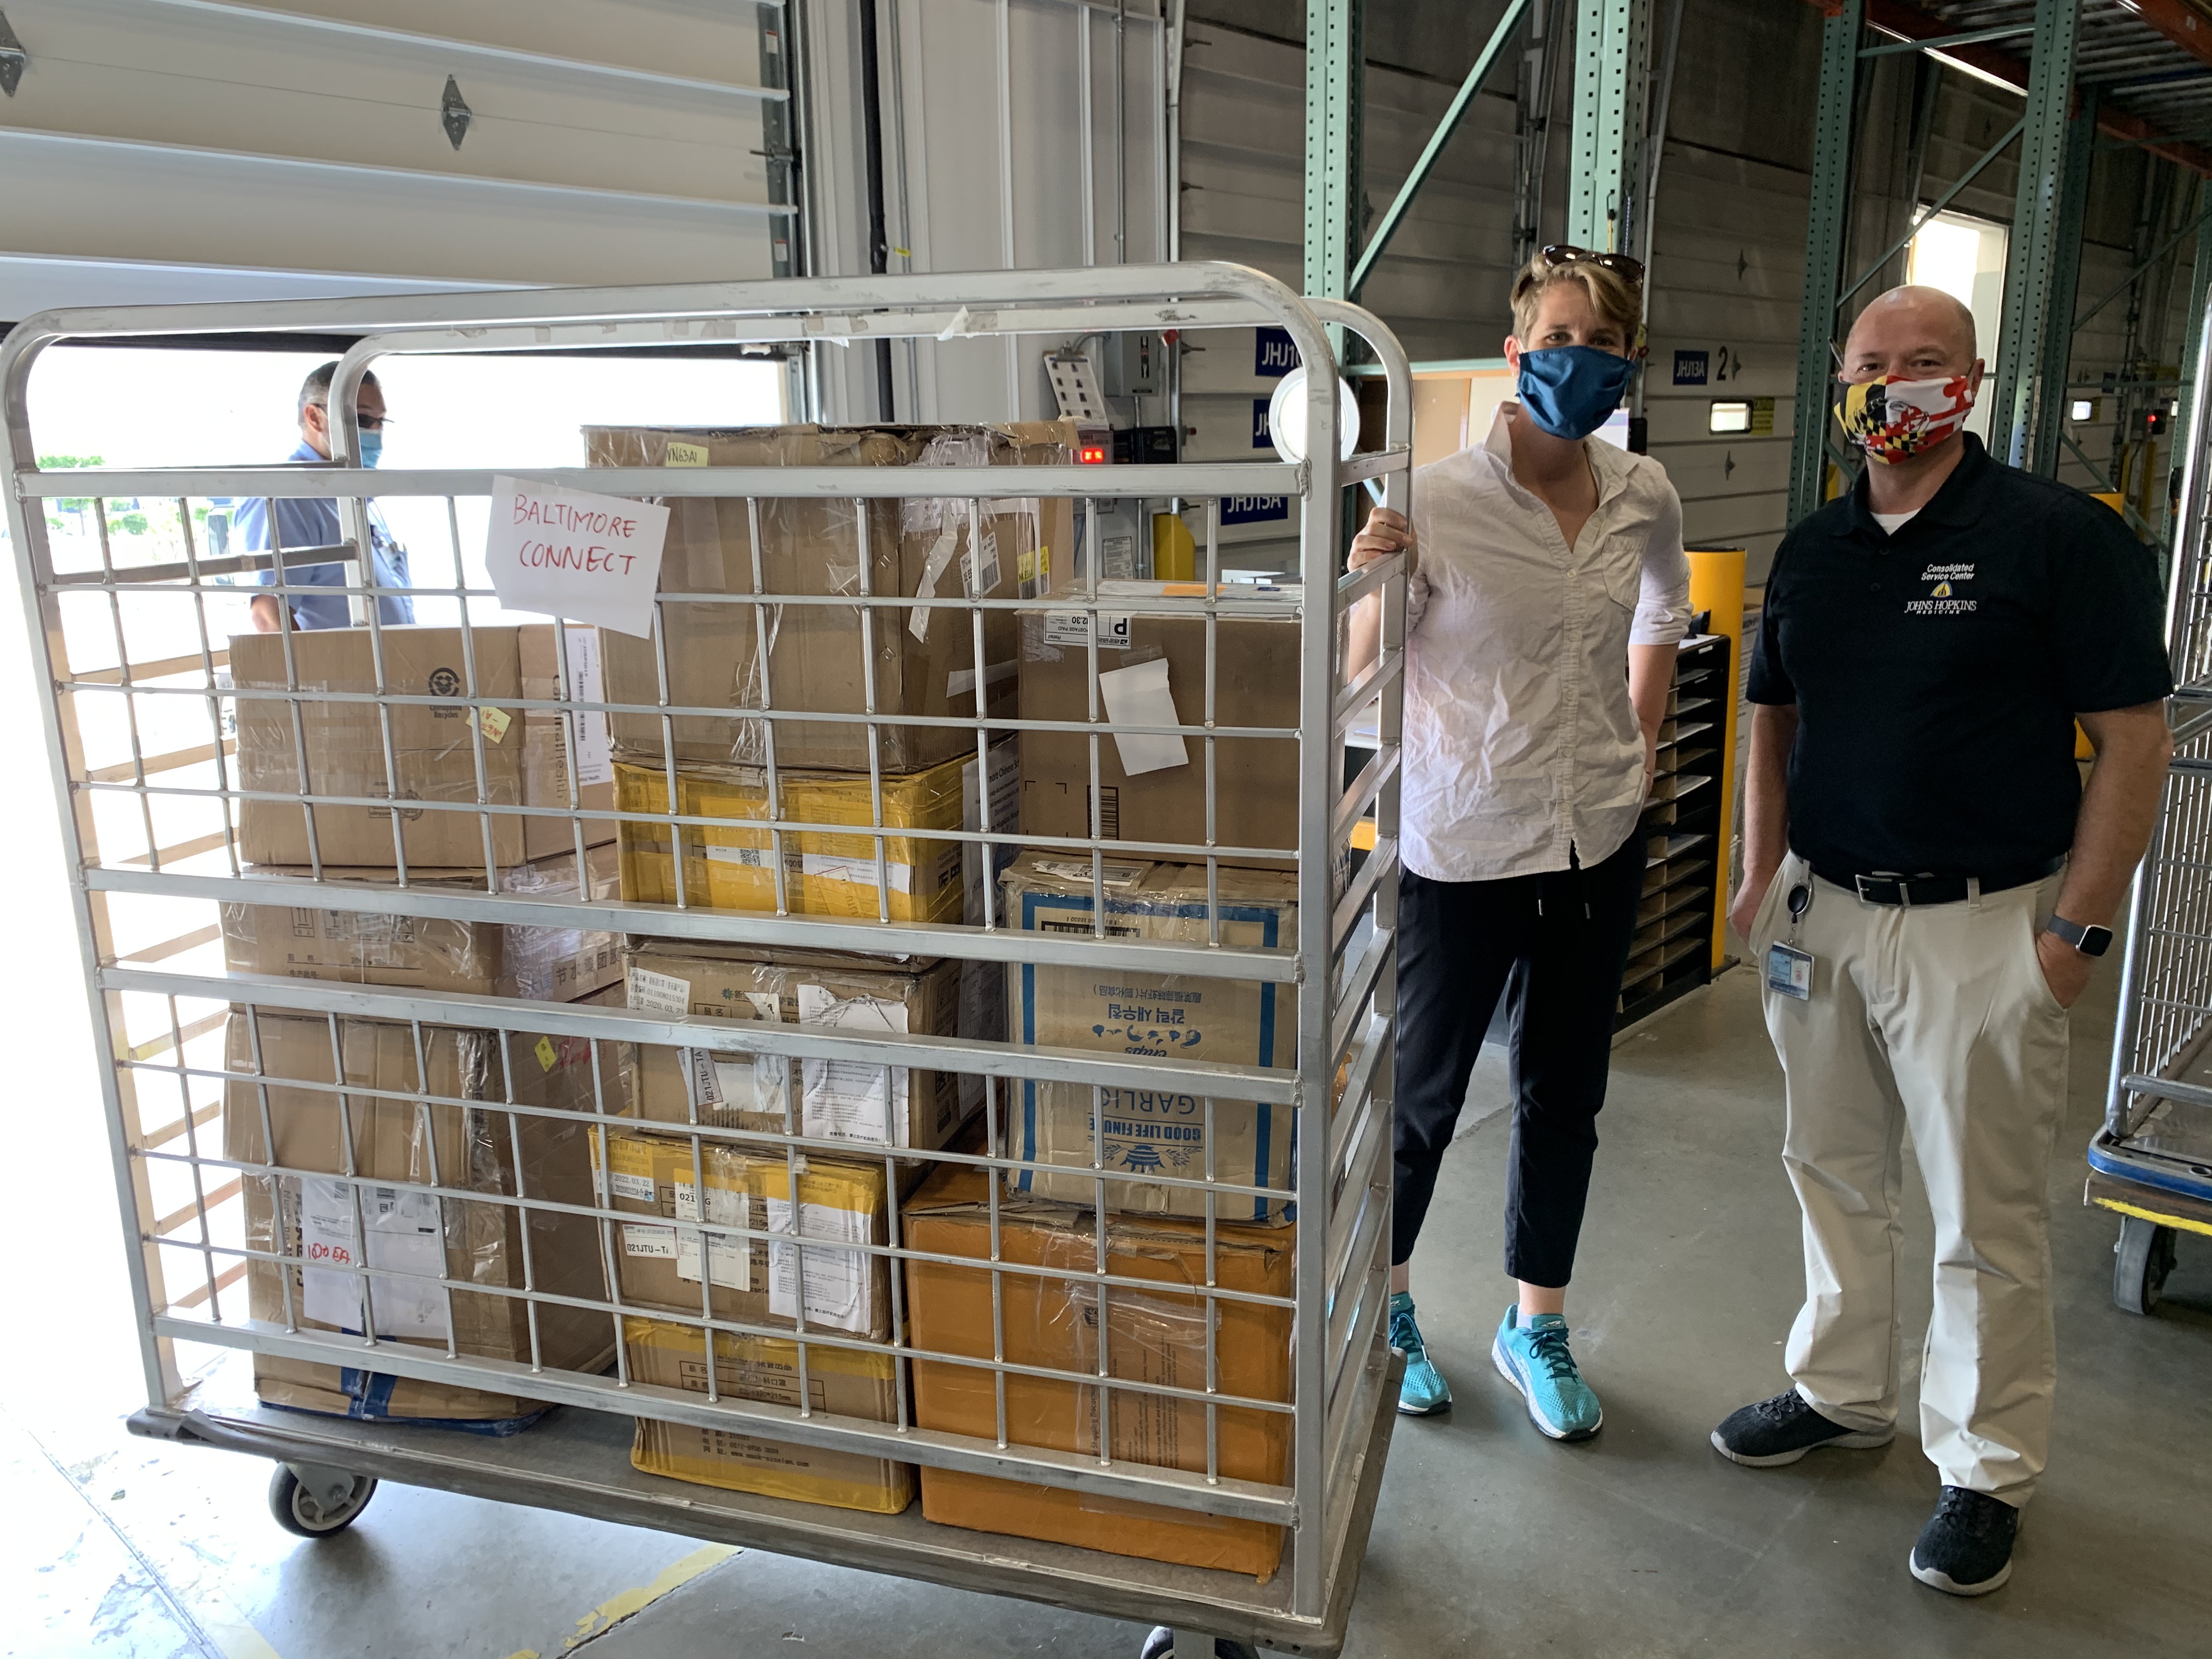 Baltimore CONNECT’s acting executive director Lindsay Hebert accepts face masks from Shawn Durning, Operations Manager for JHHS Consolidated Service Center.